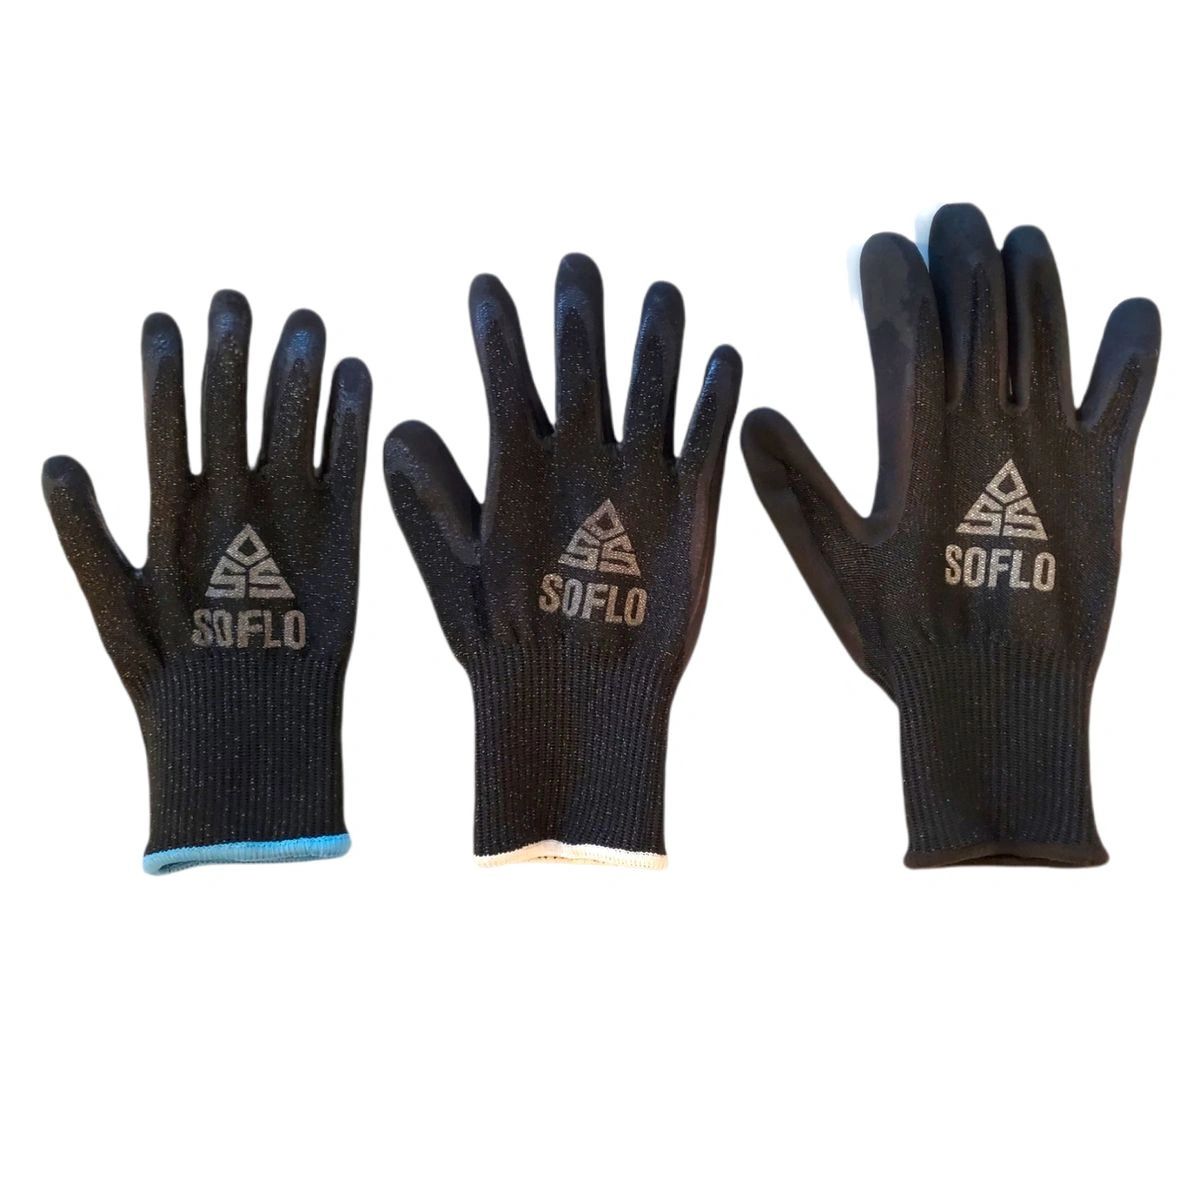 Spearfishing Gloves - 3 Layer Cut & Puncture Resistant Nitrile Gloves